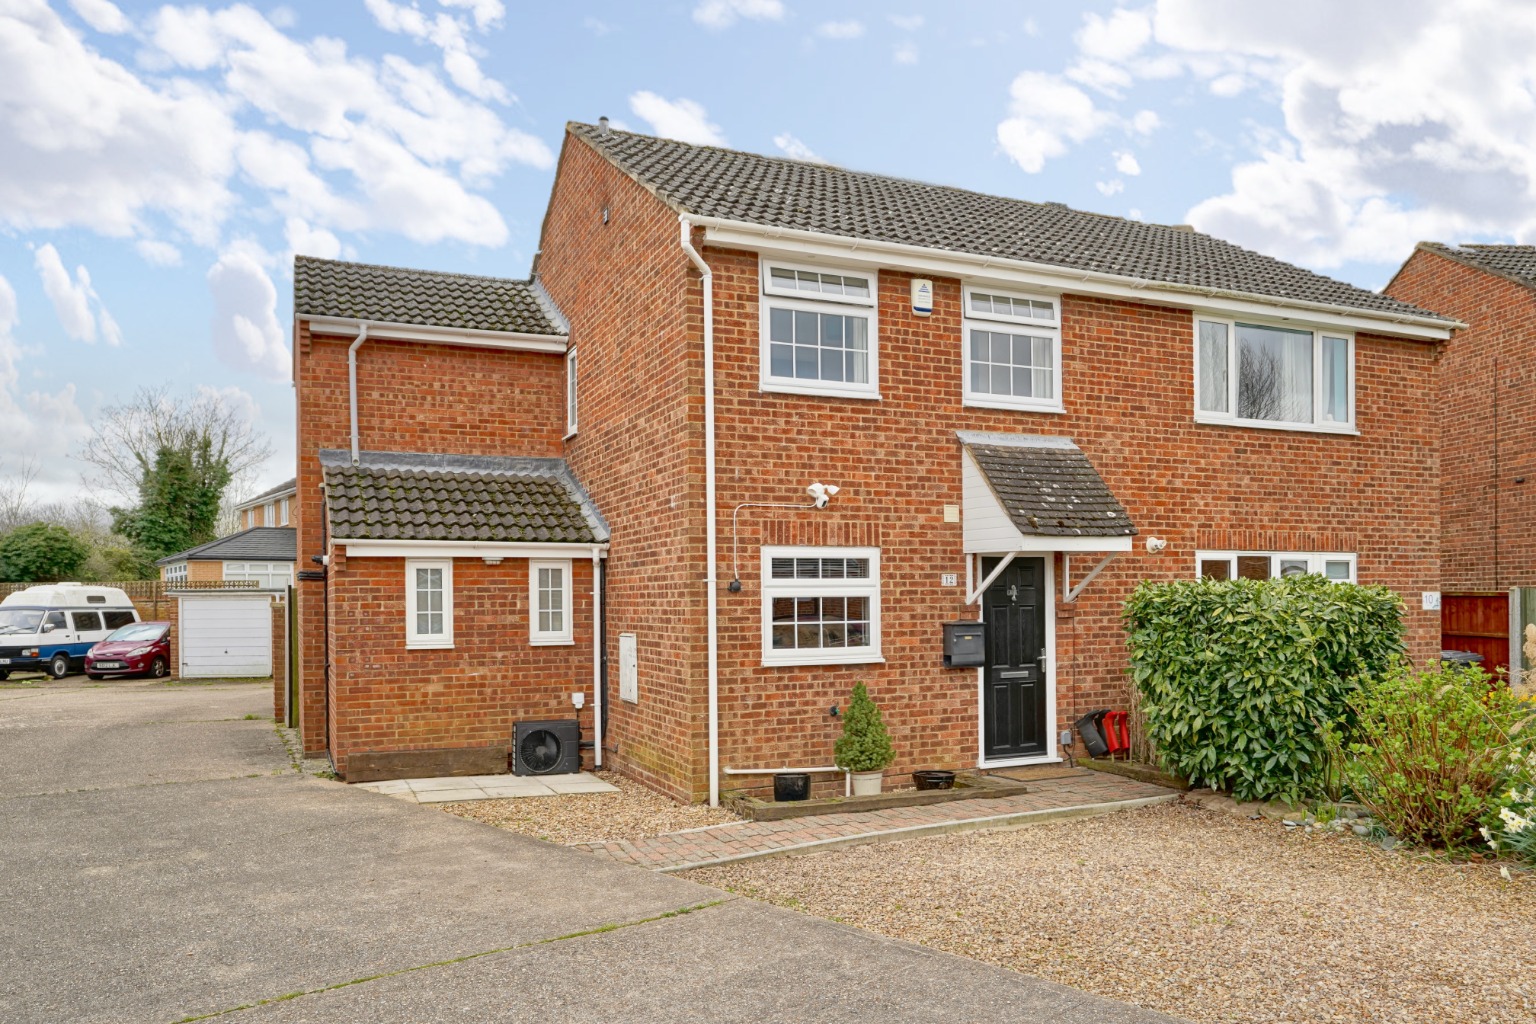 3 bed semi-detached house for sale in Gordon Close, St Neots - Property Image 1